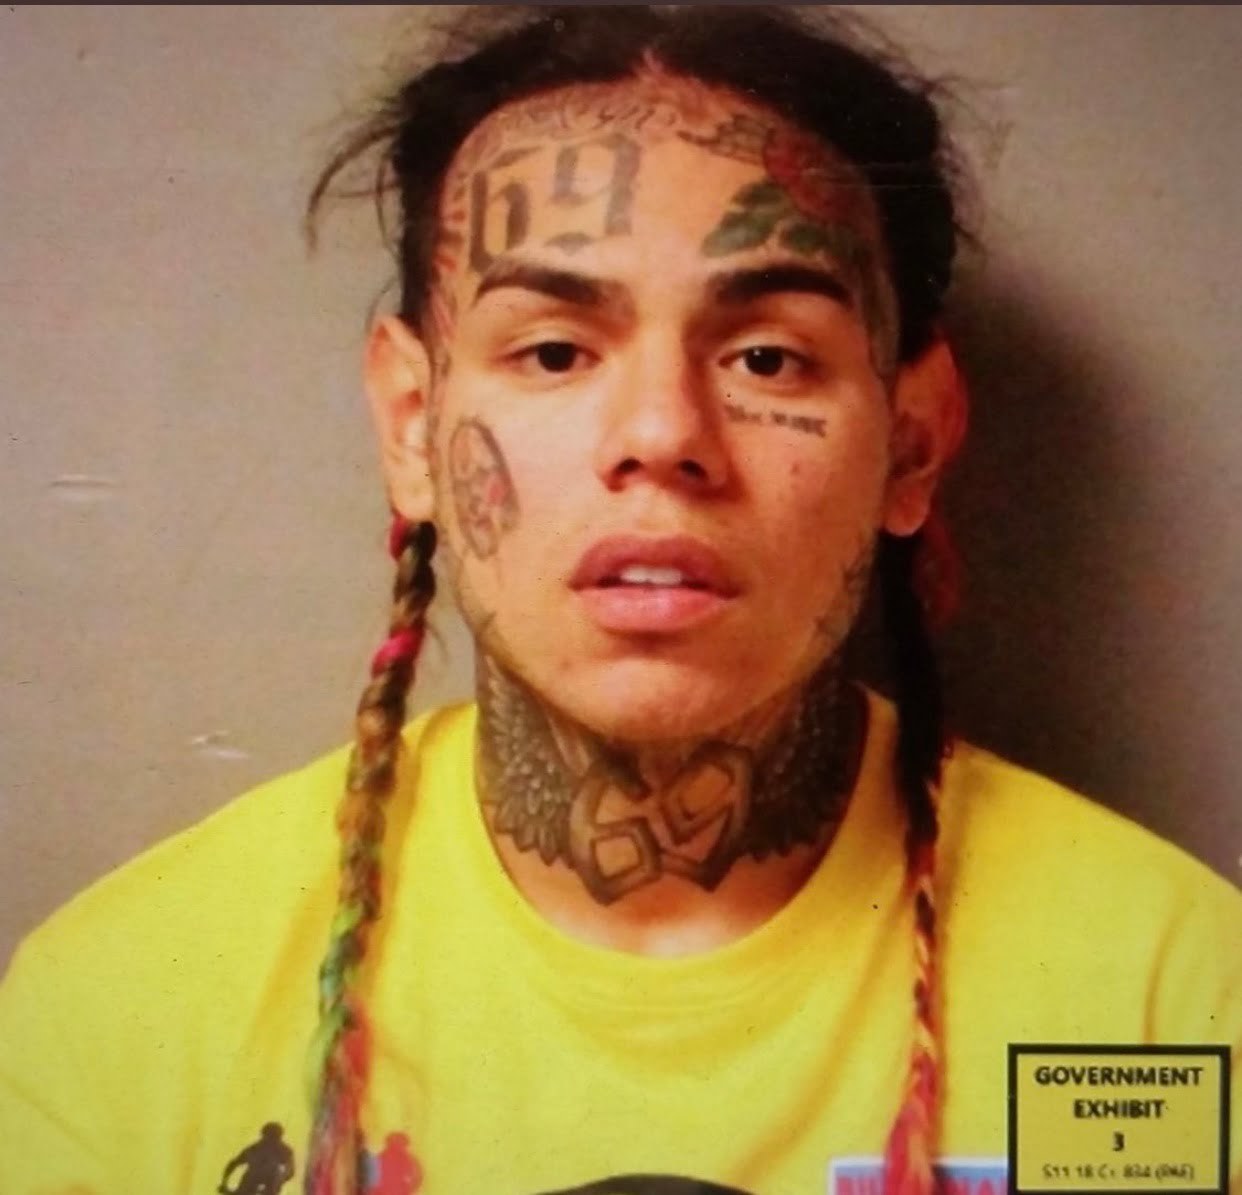 Video Of Tekashi 6ix9ine In The Hot Seat In Court Leaked Online